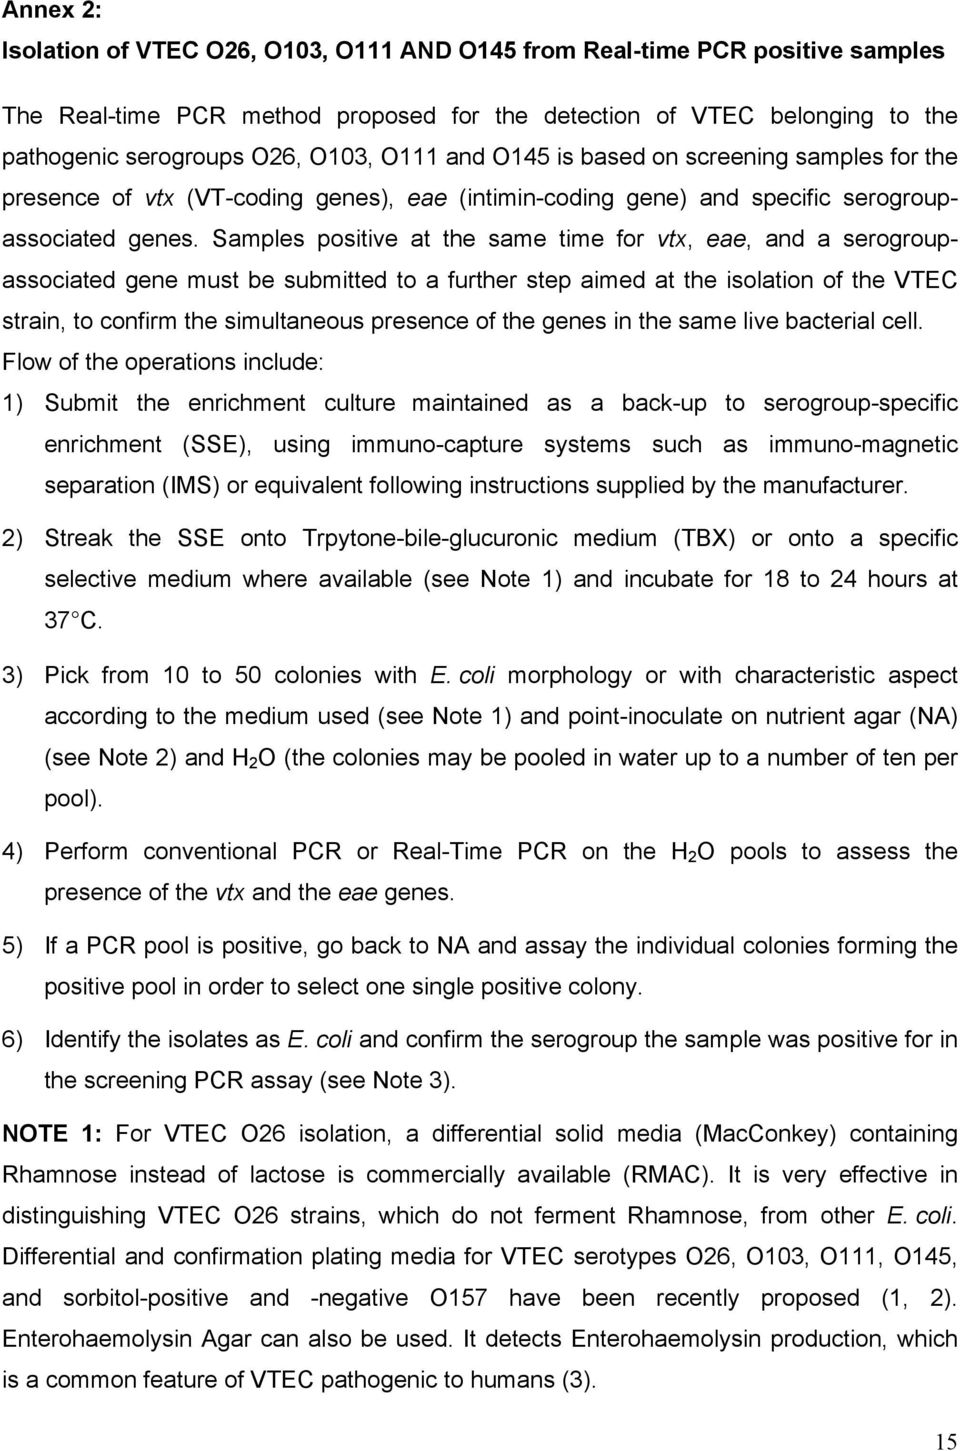 Samples positive at the same time for vtx, eae, and a serogroupassociated gene must be submitted to a further step aimed at the isolation of the VTEC strain, to confirm the simultaneous presence of